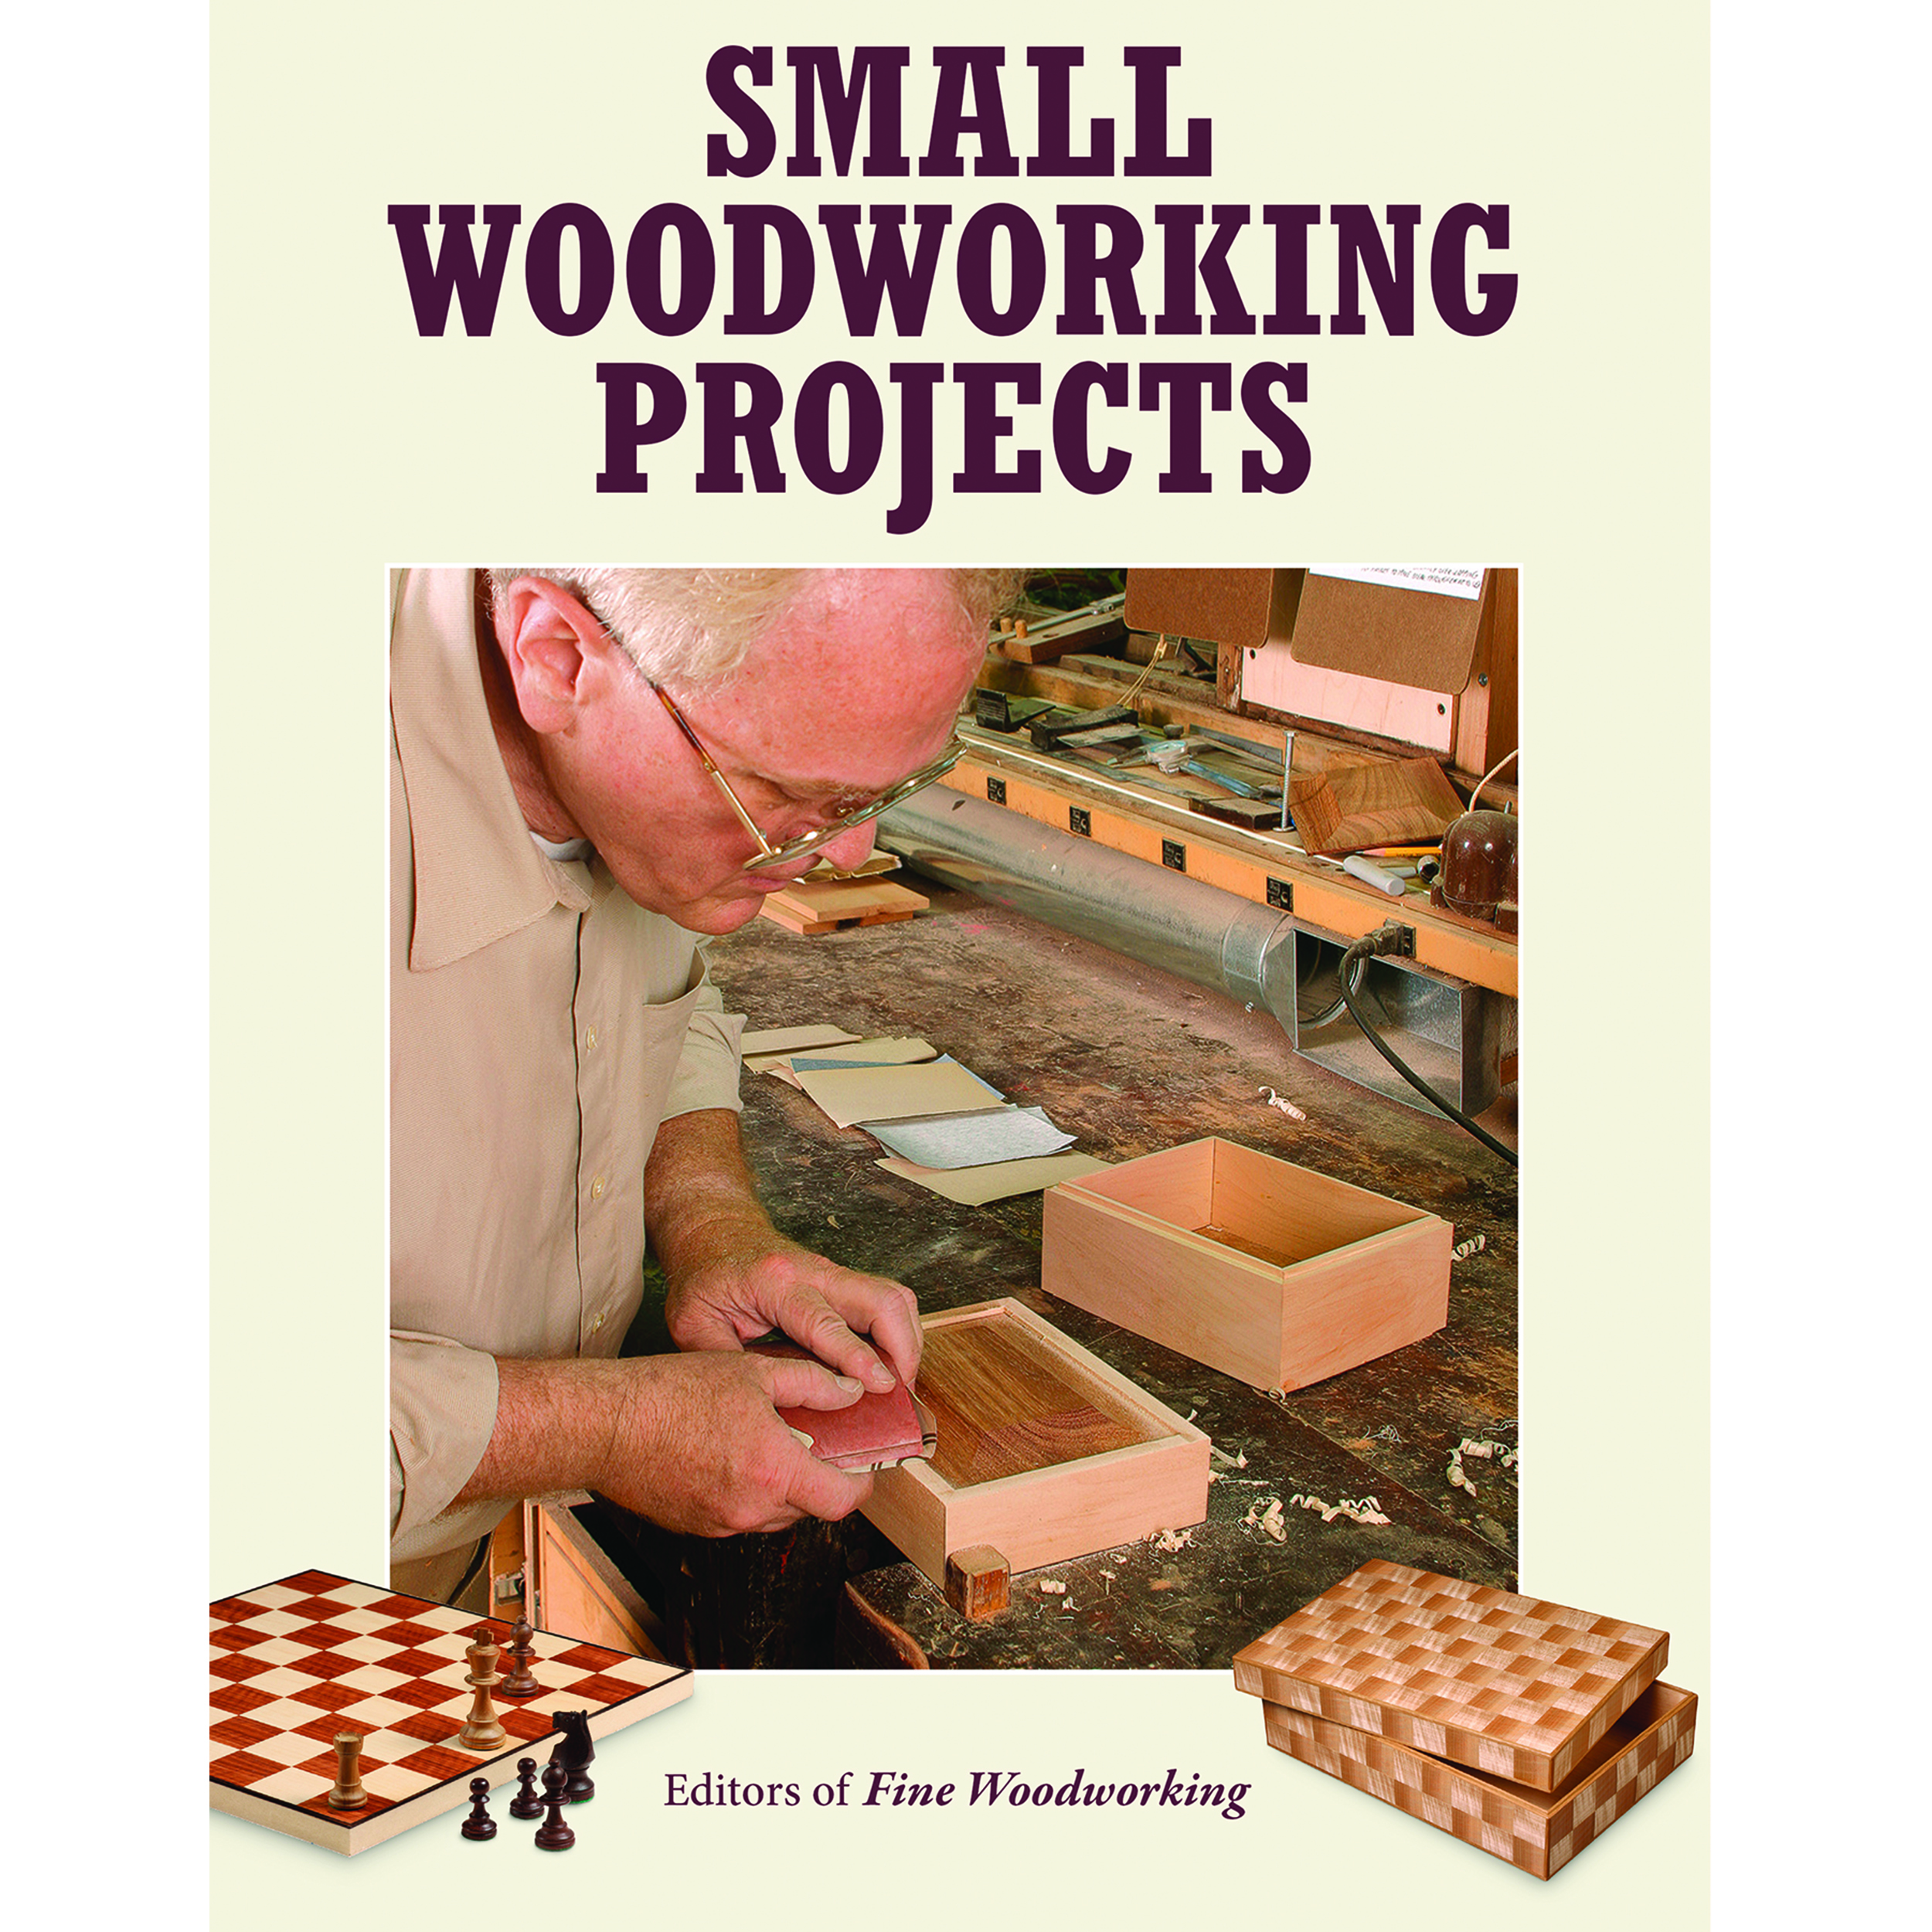 Small Woodworking Projects